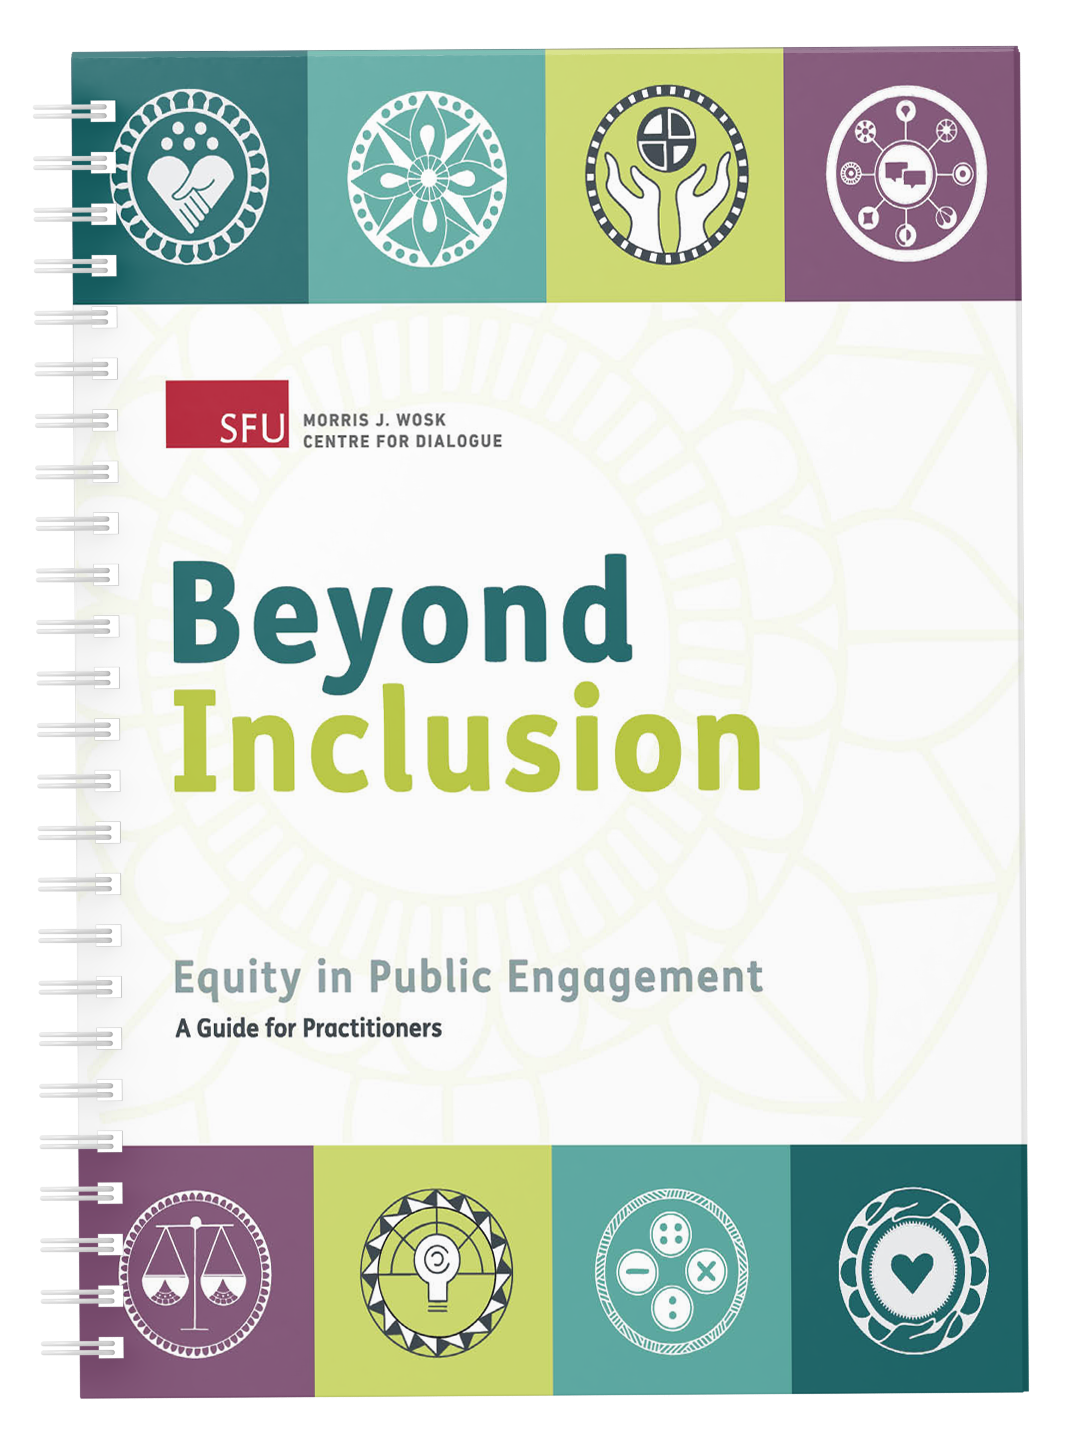 Cover of Beyond Inclusion International guide